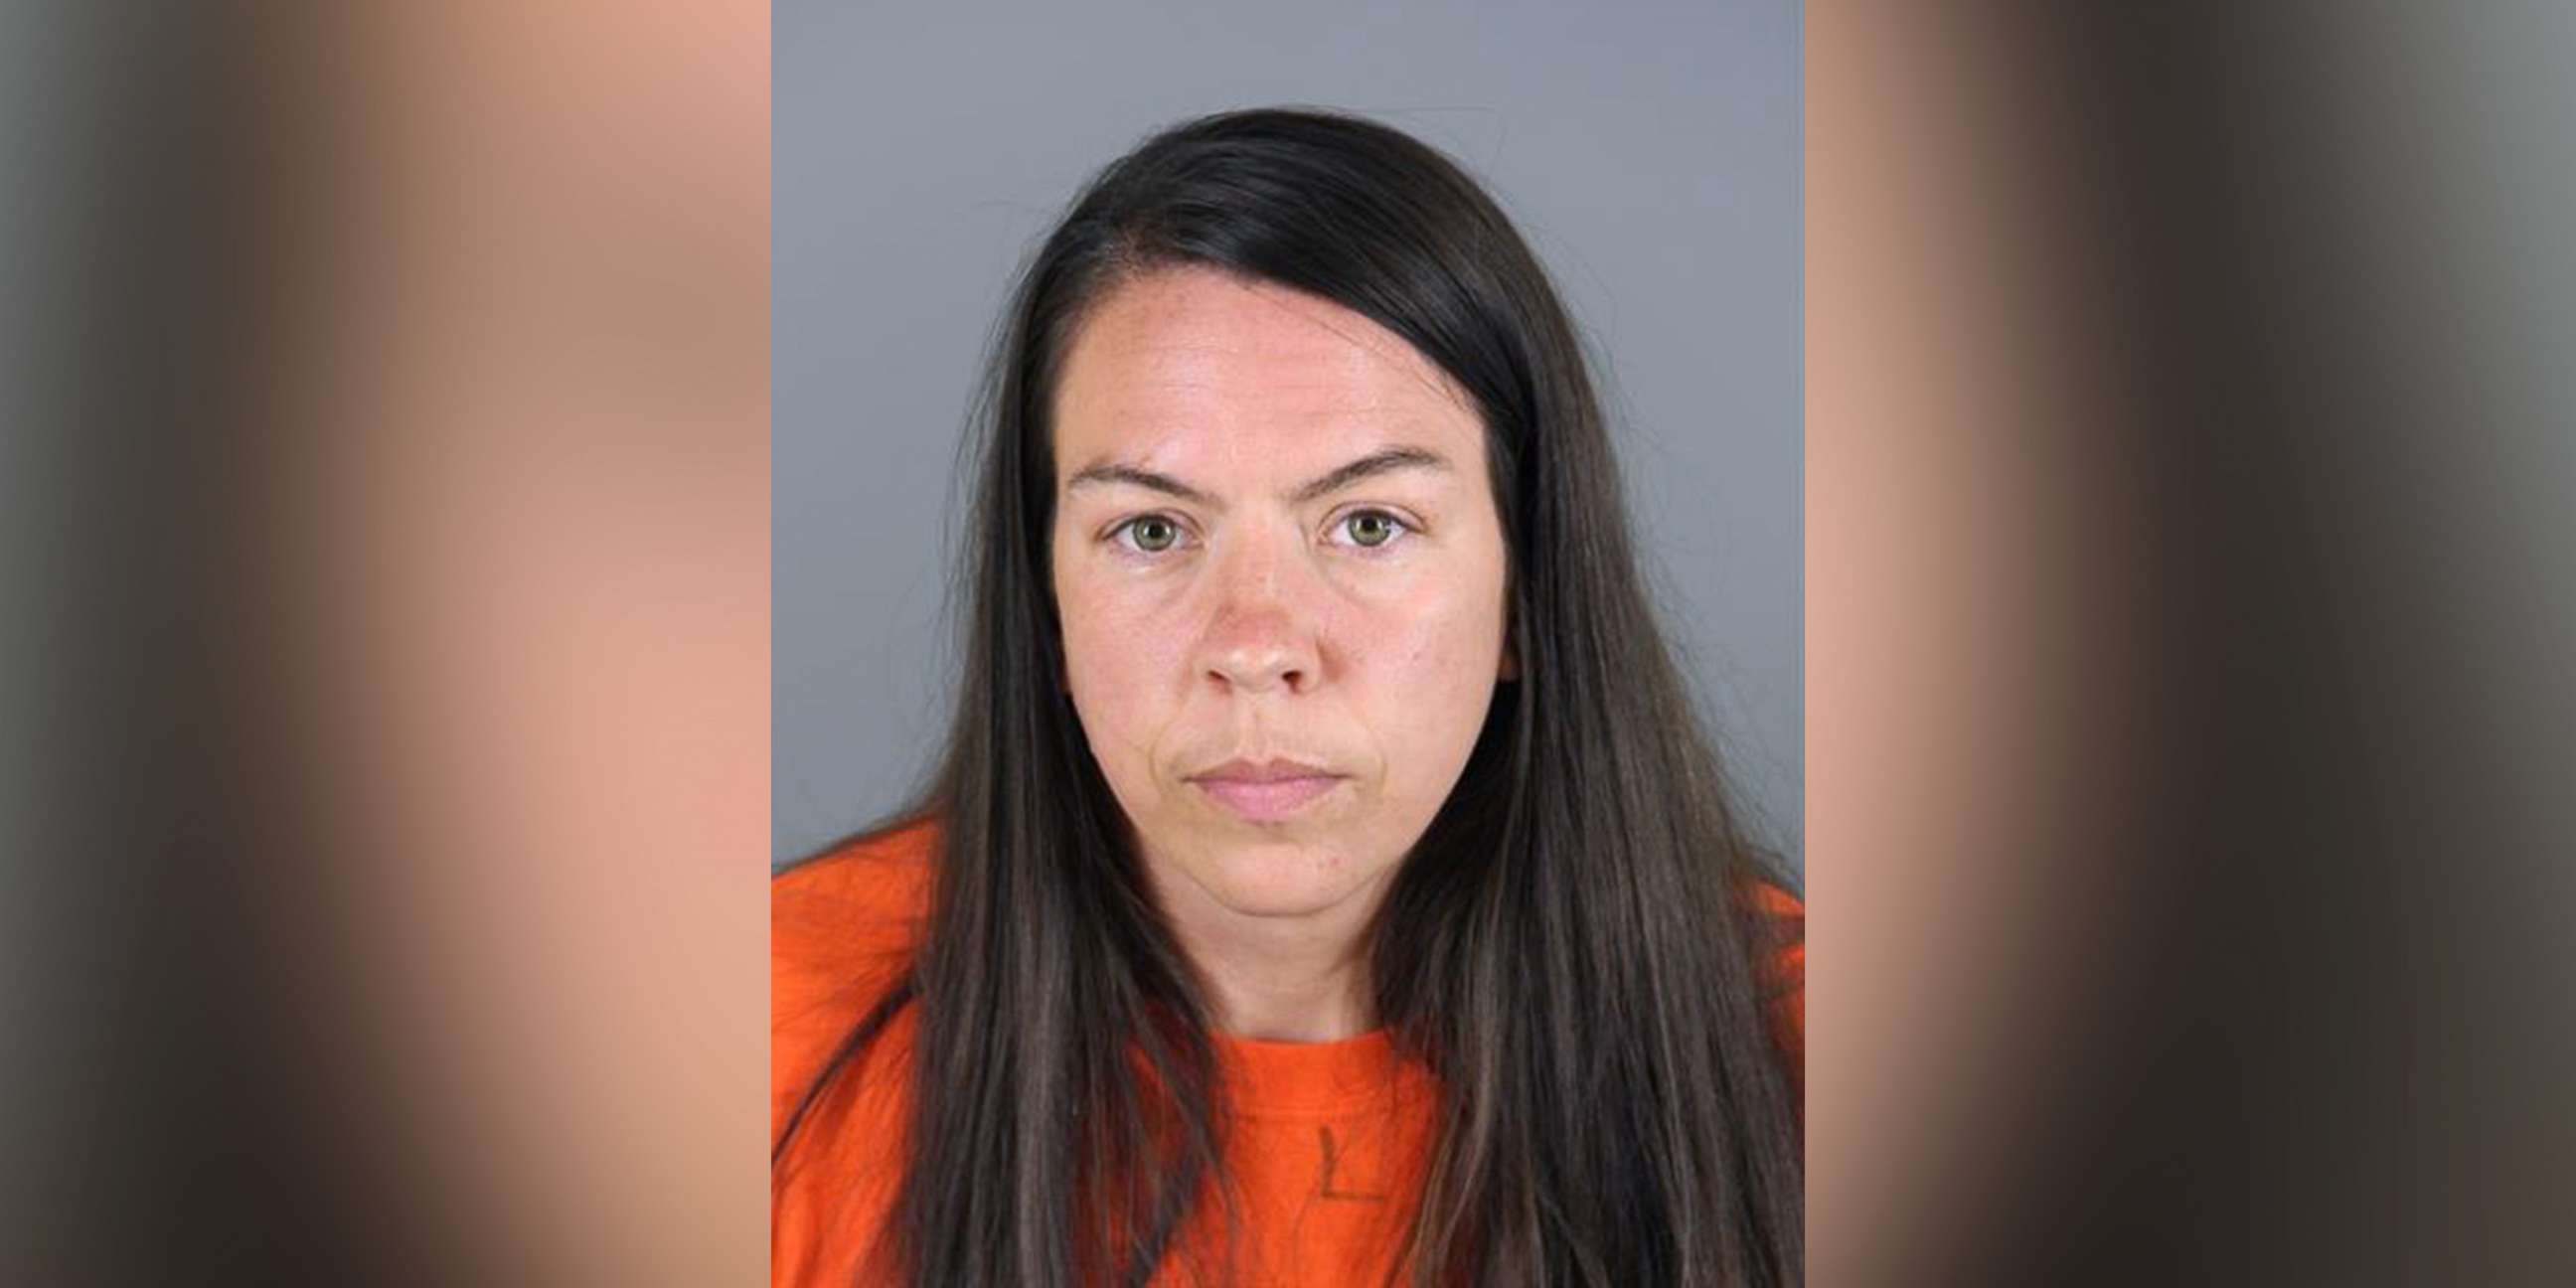 Wisconsin woman arrested, accused of murdering friend with eye drops image